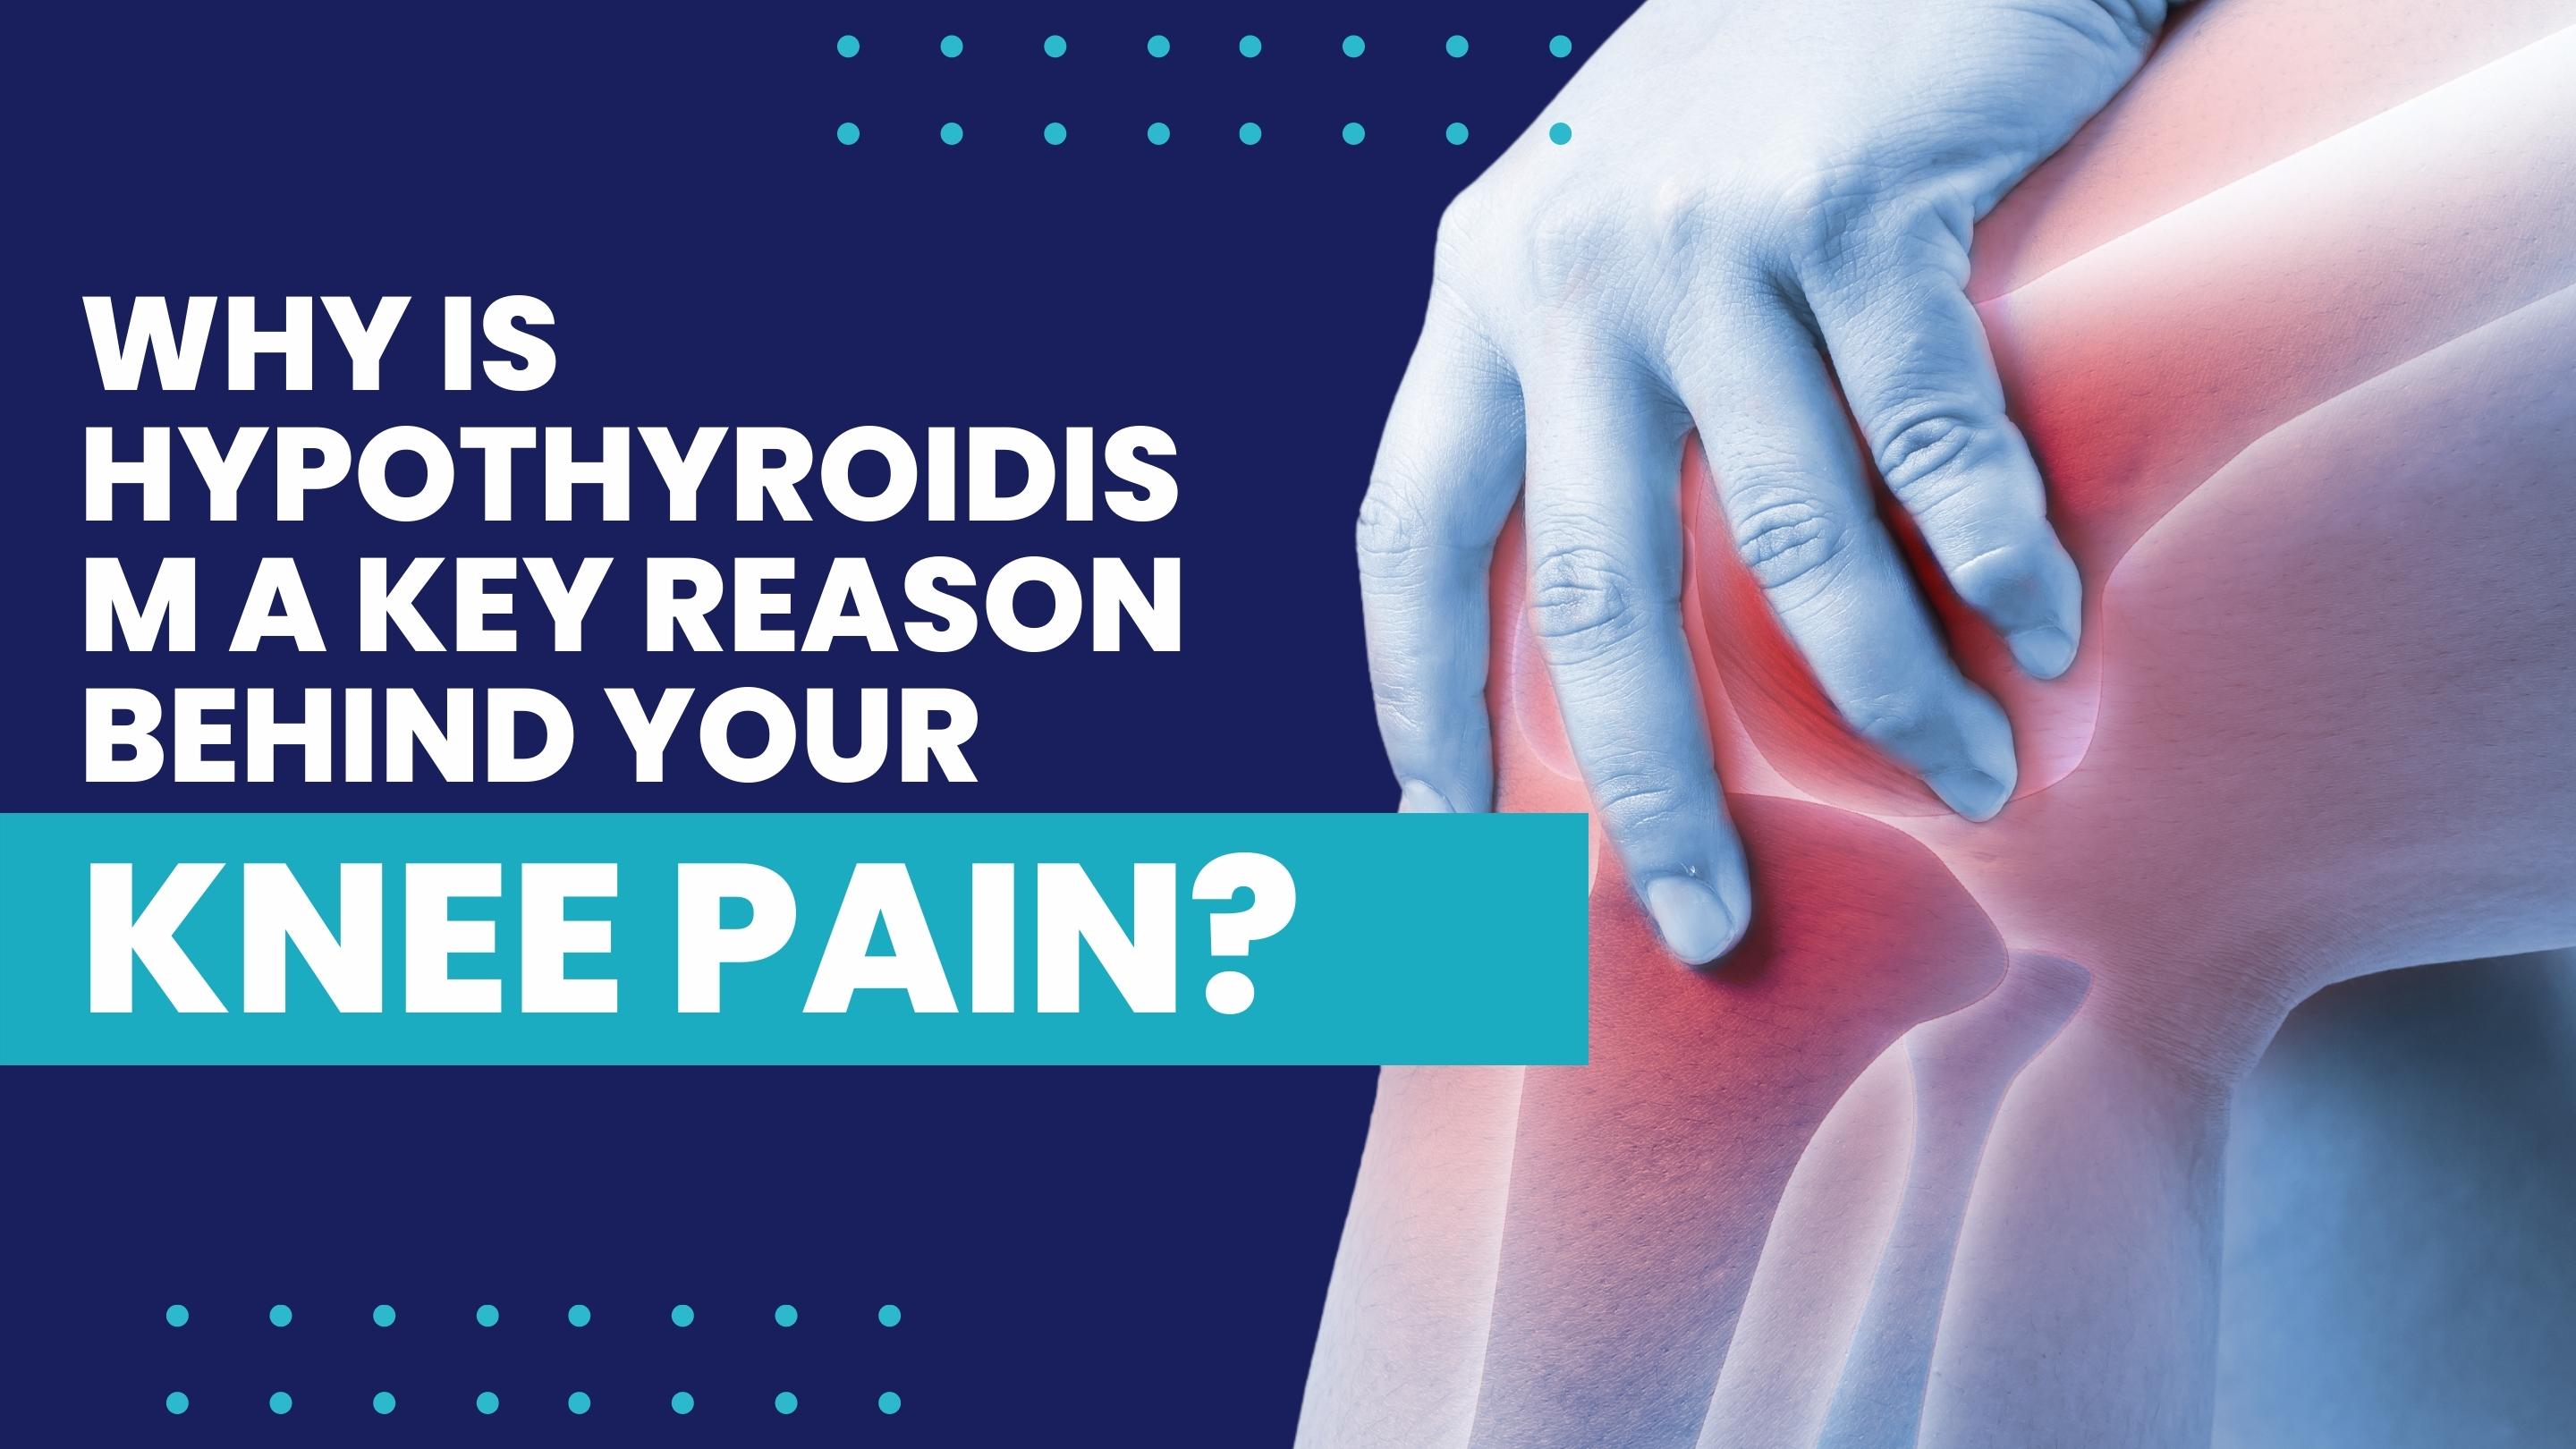 Hypothyroidism and knee pain